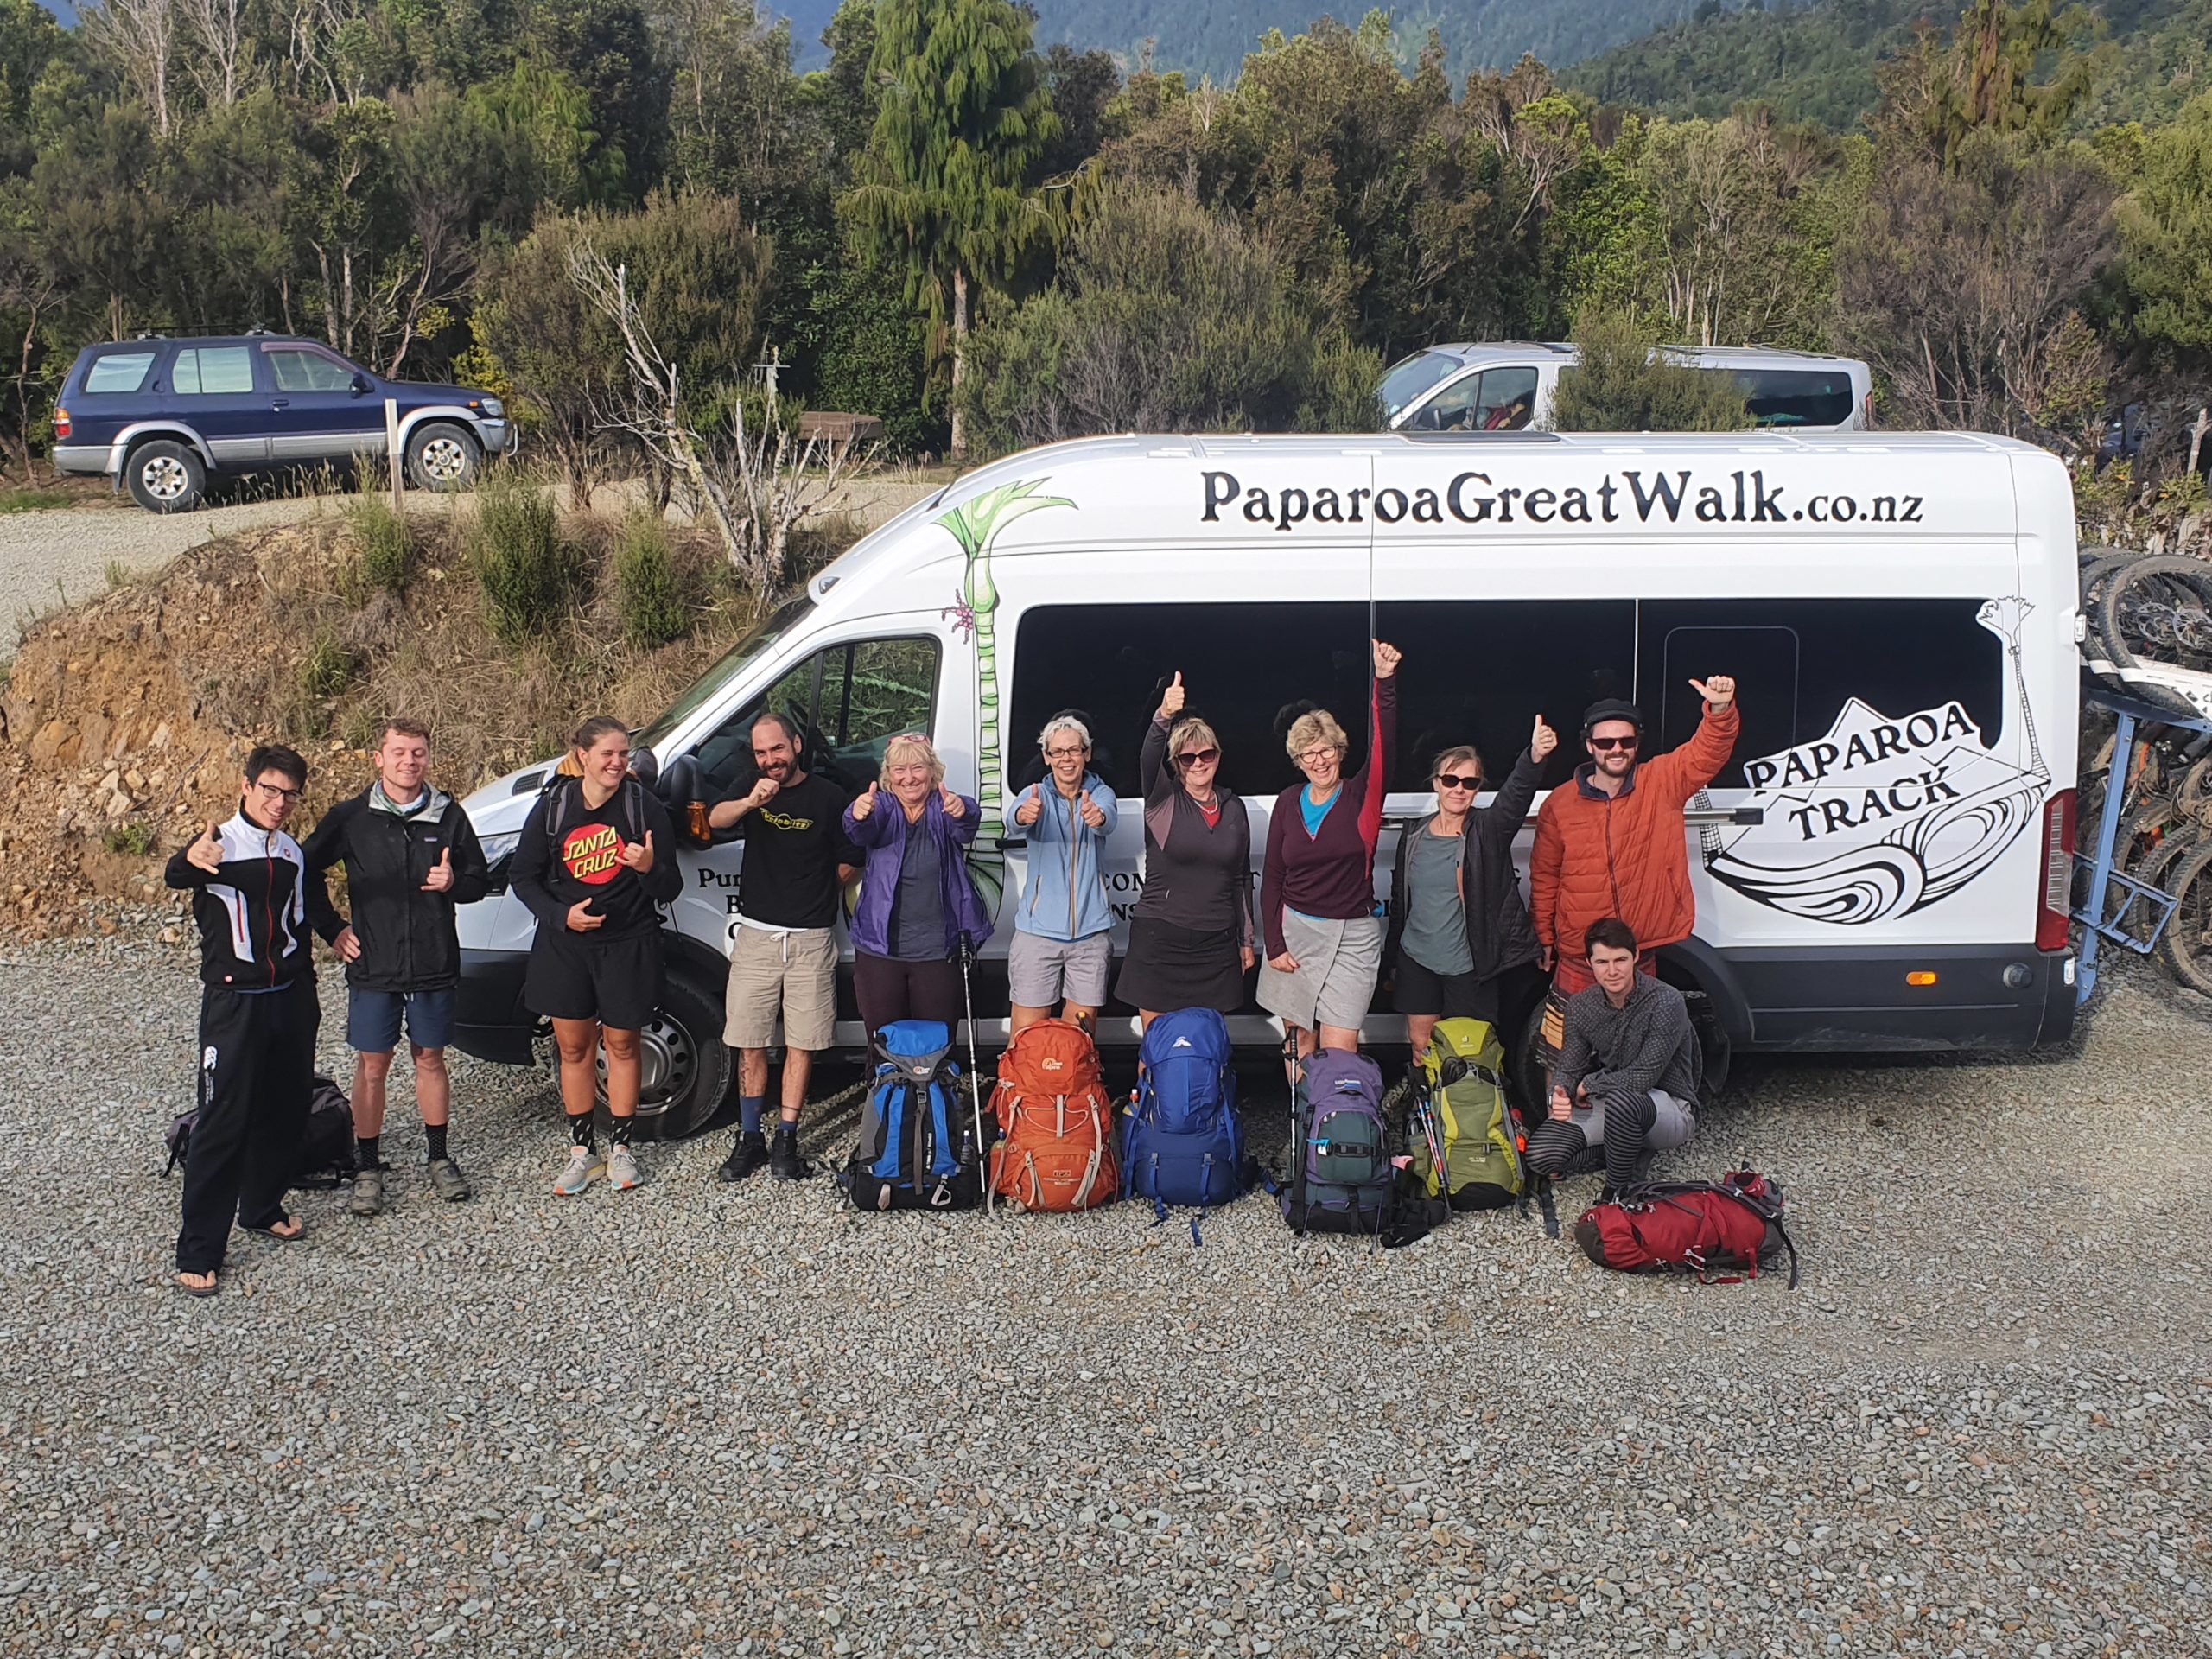 Open 22 days, a recount of the Paparoa Track’s first 3 weeks.